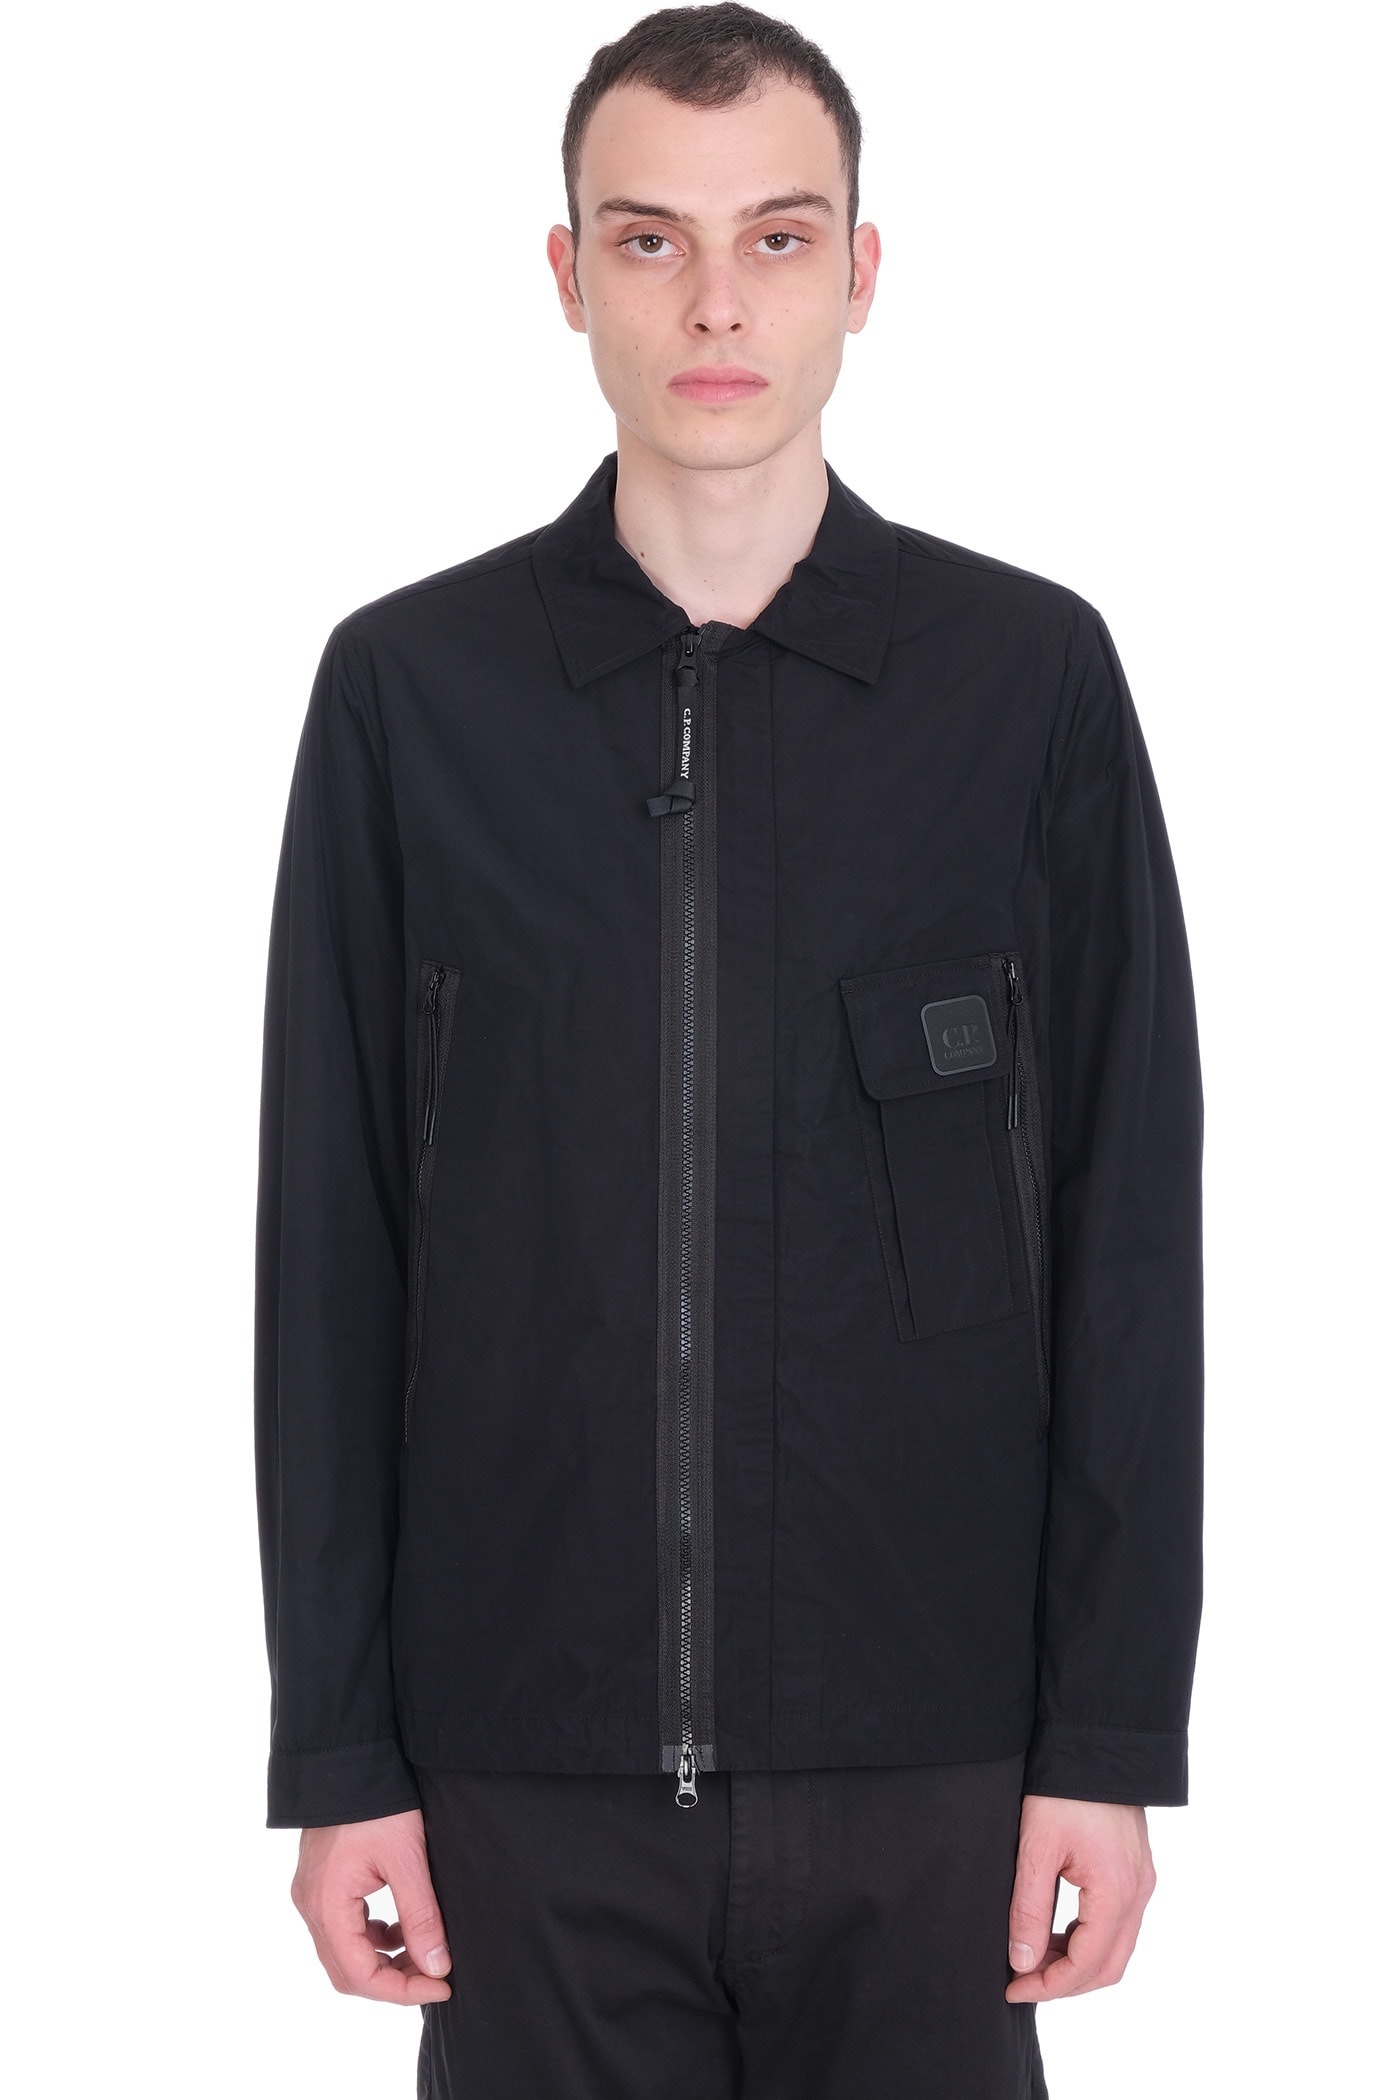 C.P. Company Casual Jacket In Black Polyester